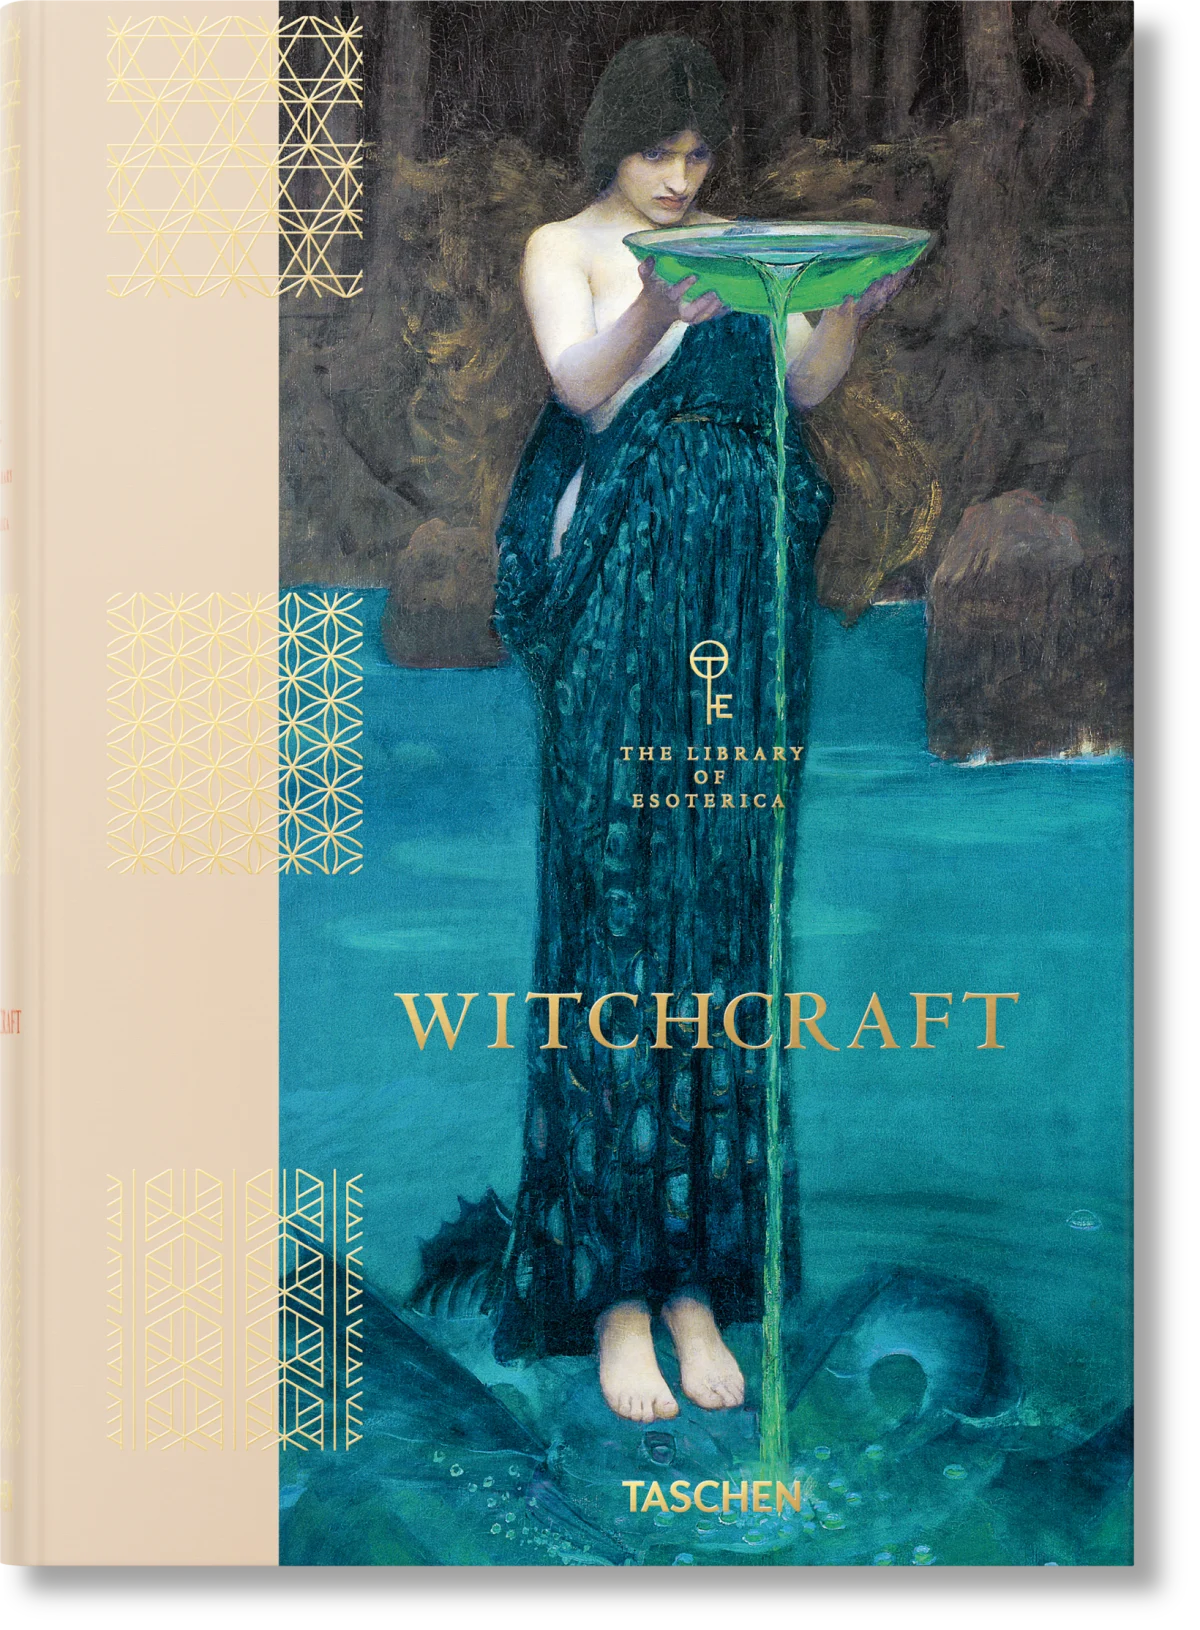 Cover of the text, Witchcraft by Jessica Hundley, published by Taschen Books.